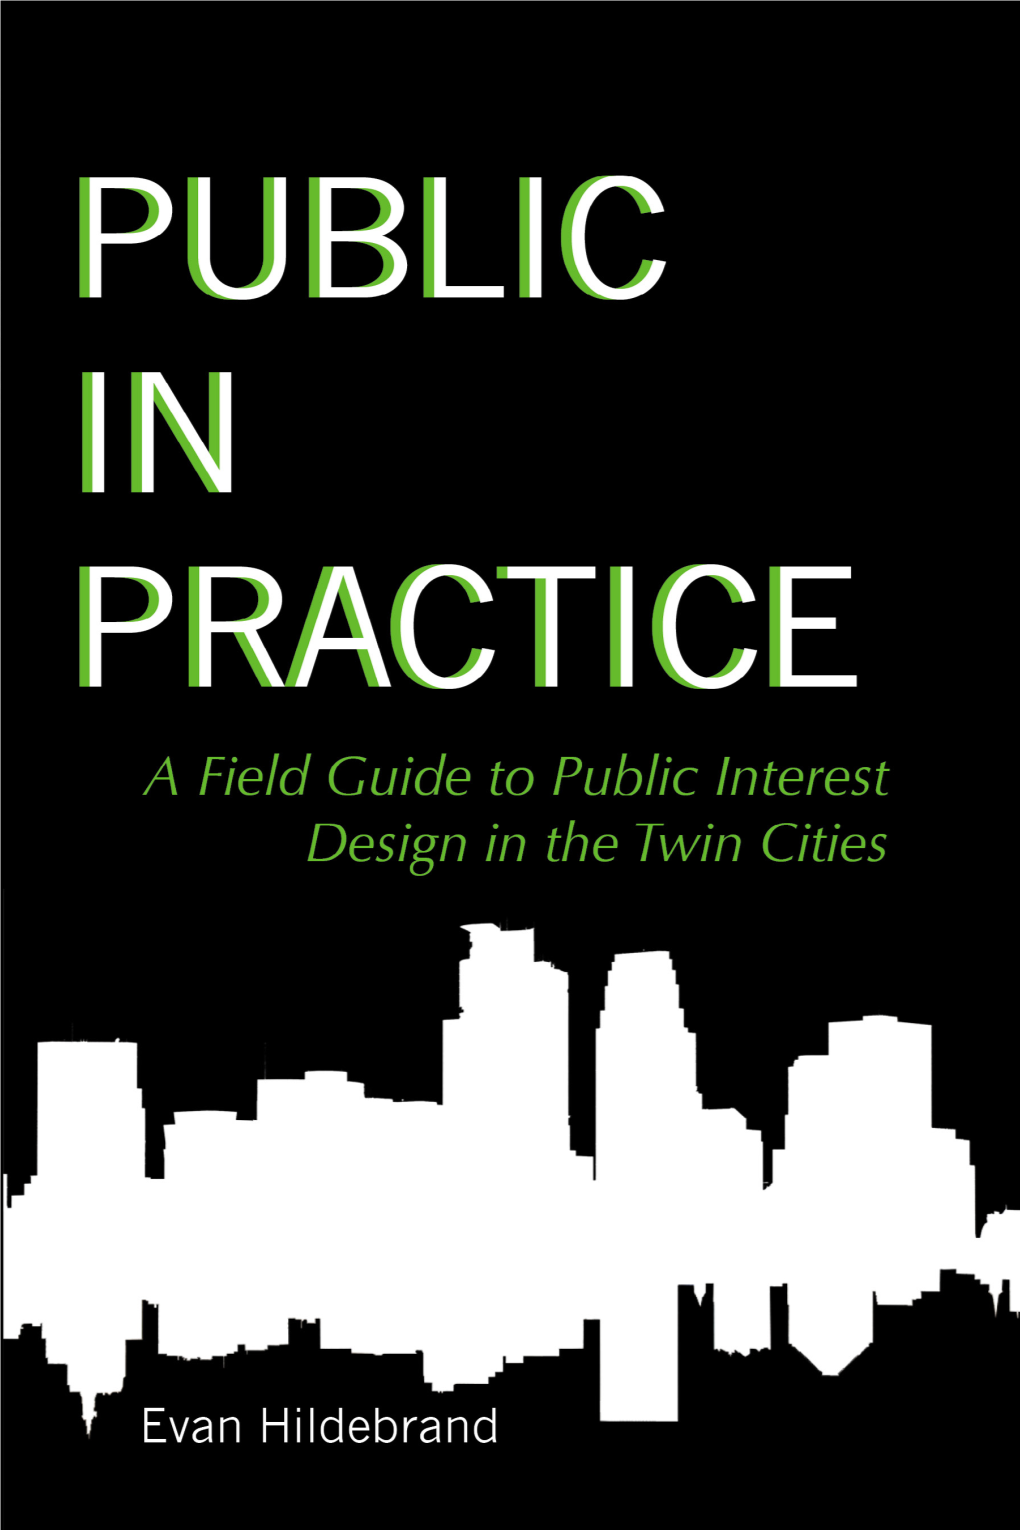 A Field Guide to Public Interest Design in the Twin Cities